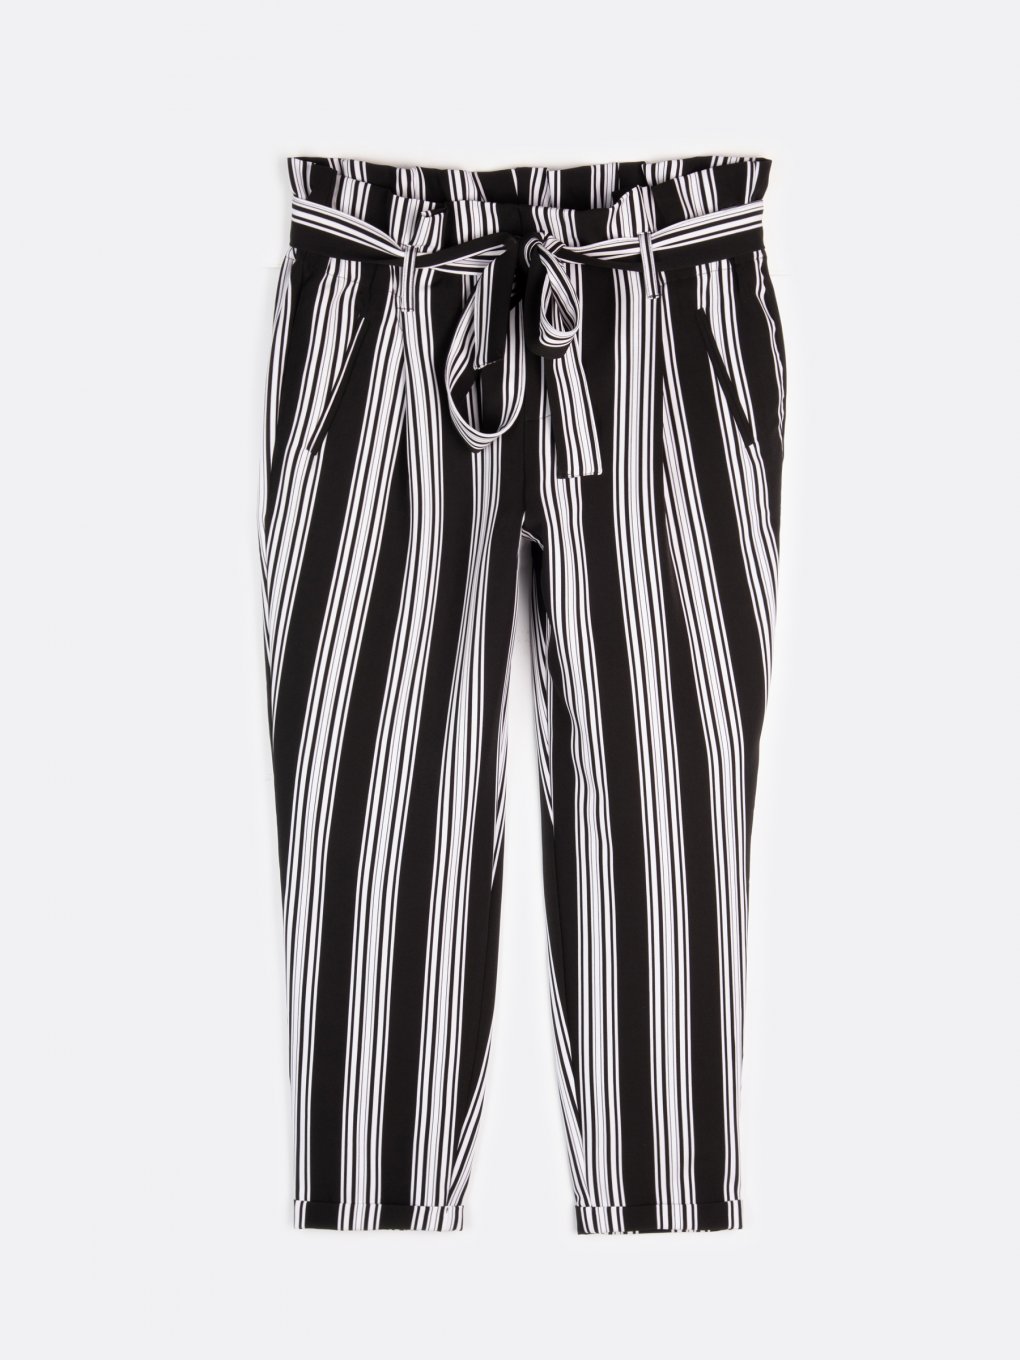 Plus size striped paperbag pants with belt